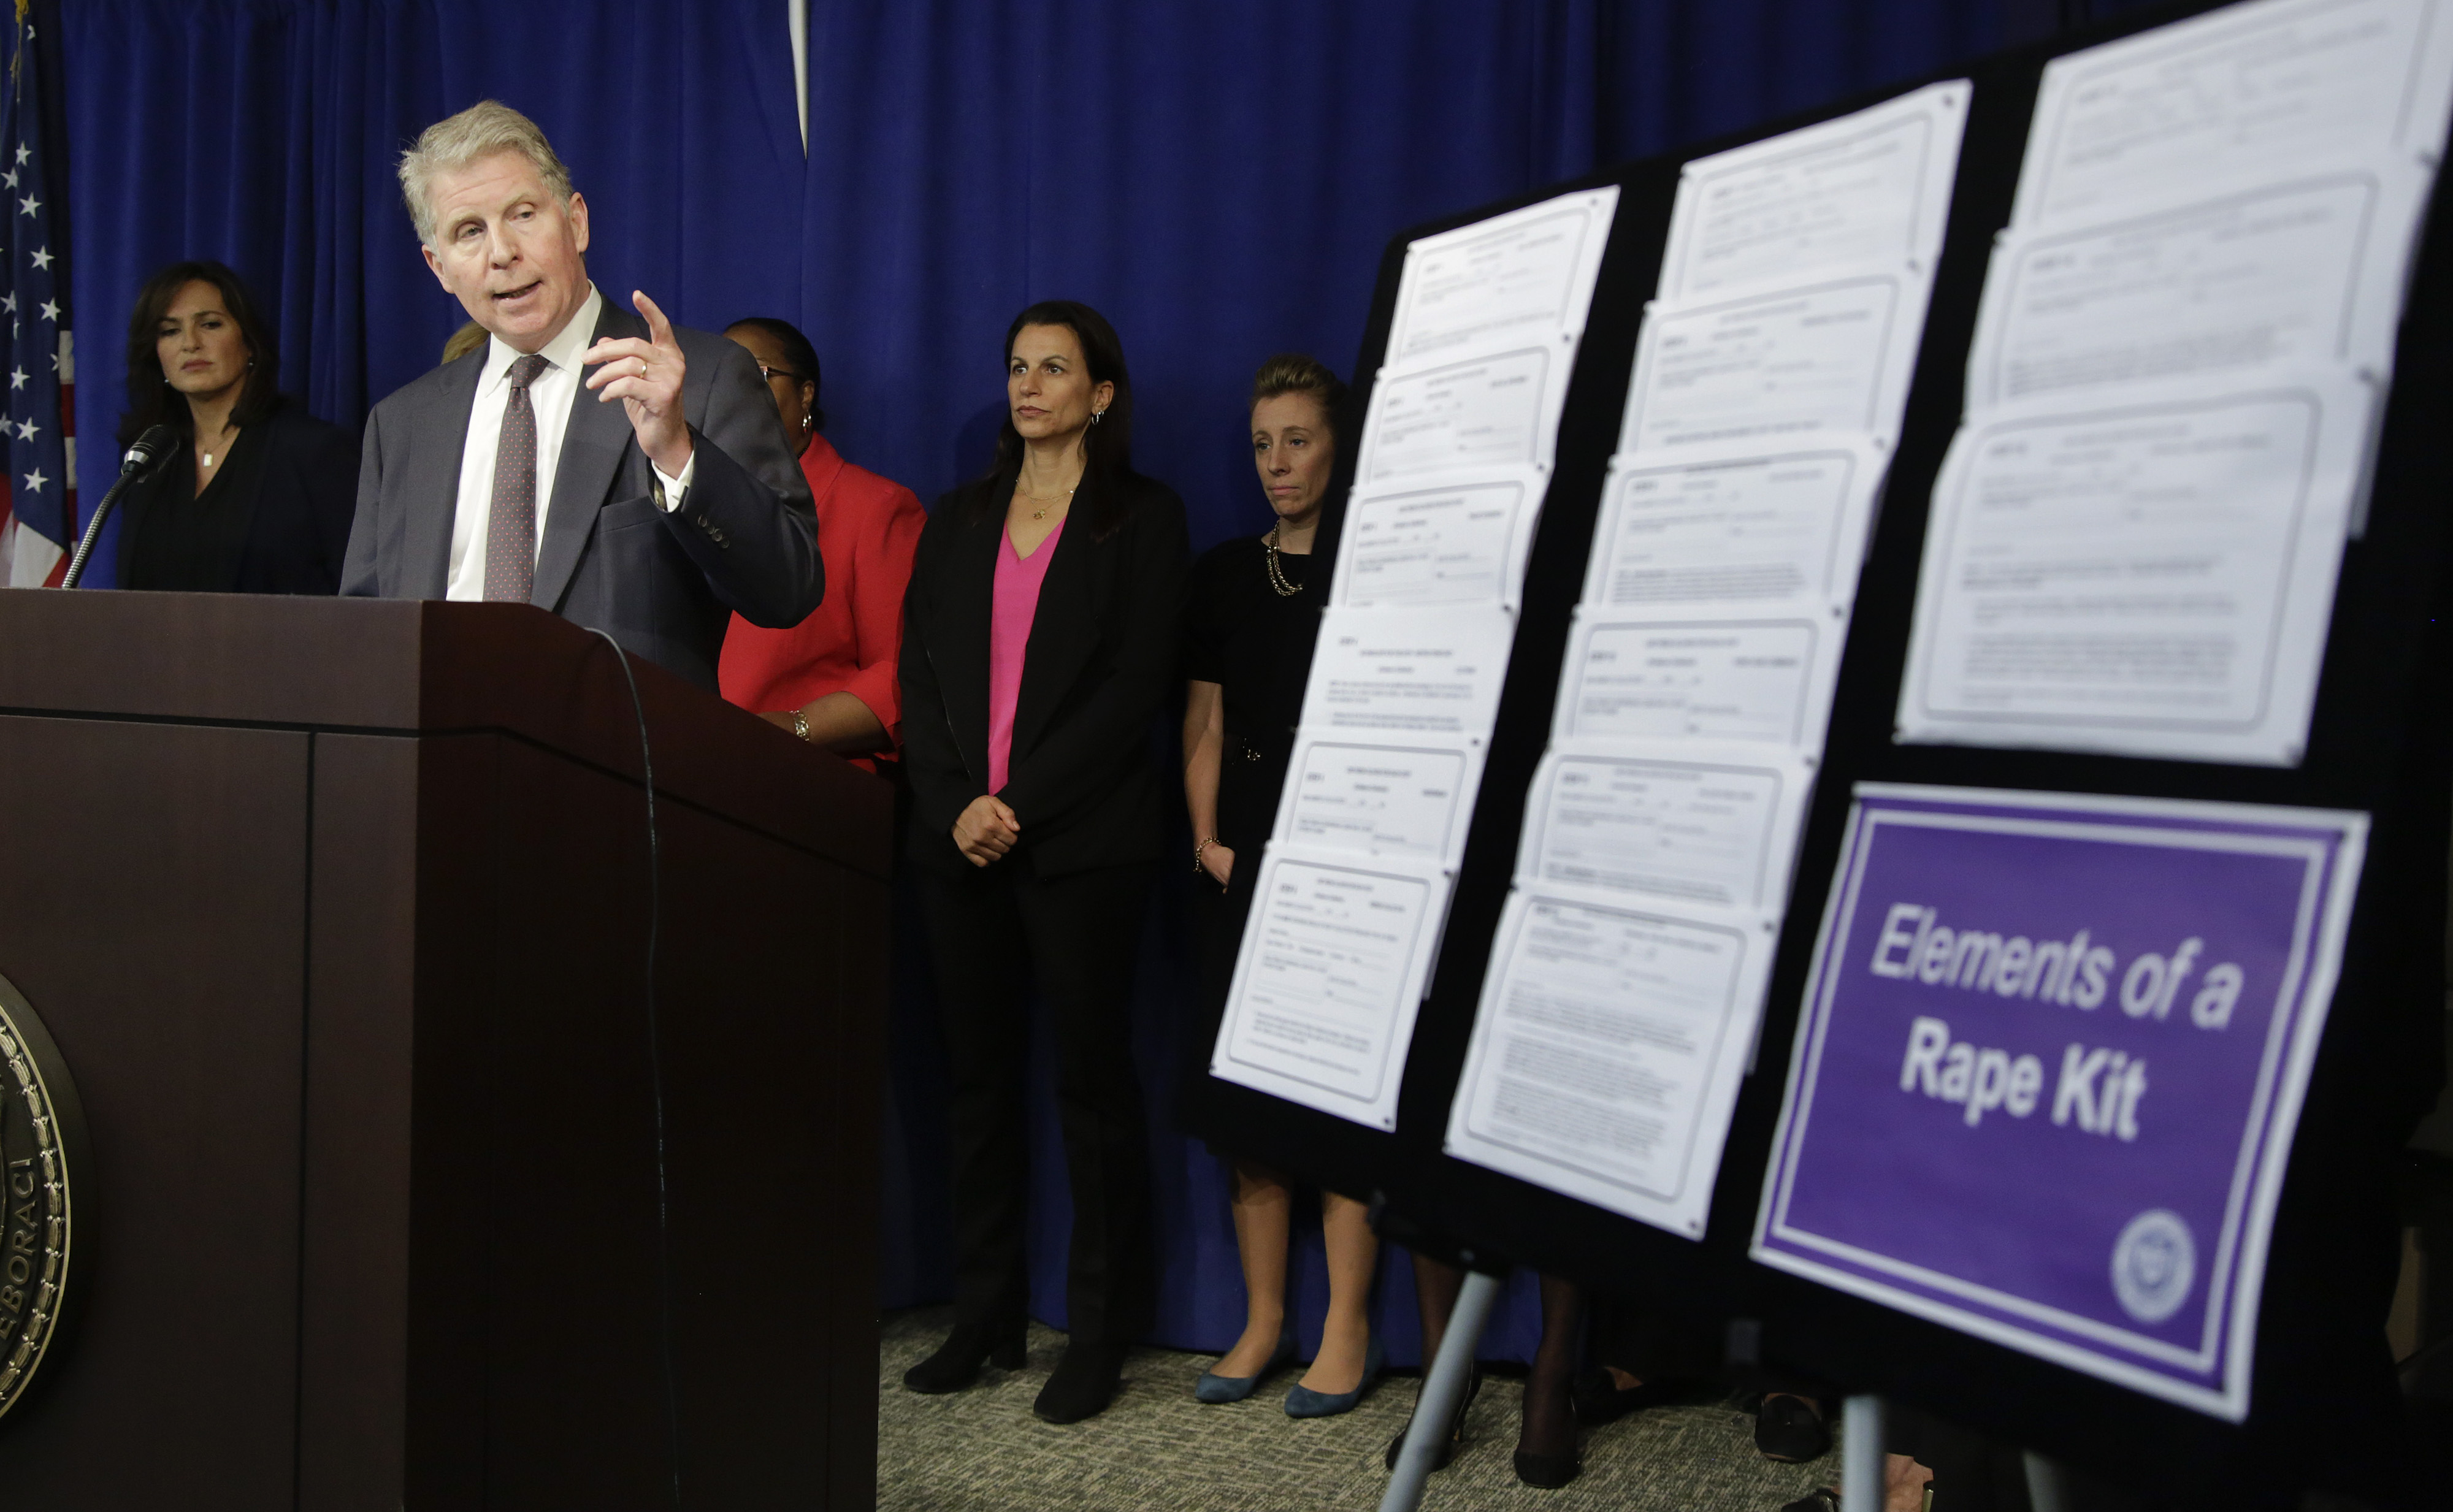 Manhattan district attorney Cyrus Vance Jr. talks about the $35 million he is pledging in funding to eliminate the backlog of untested rape kits in New York City, the state and across the country during a news conference,Nov. 12, 2014, in New York. (Julie Jacobson—AP)